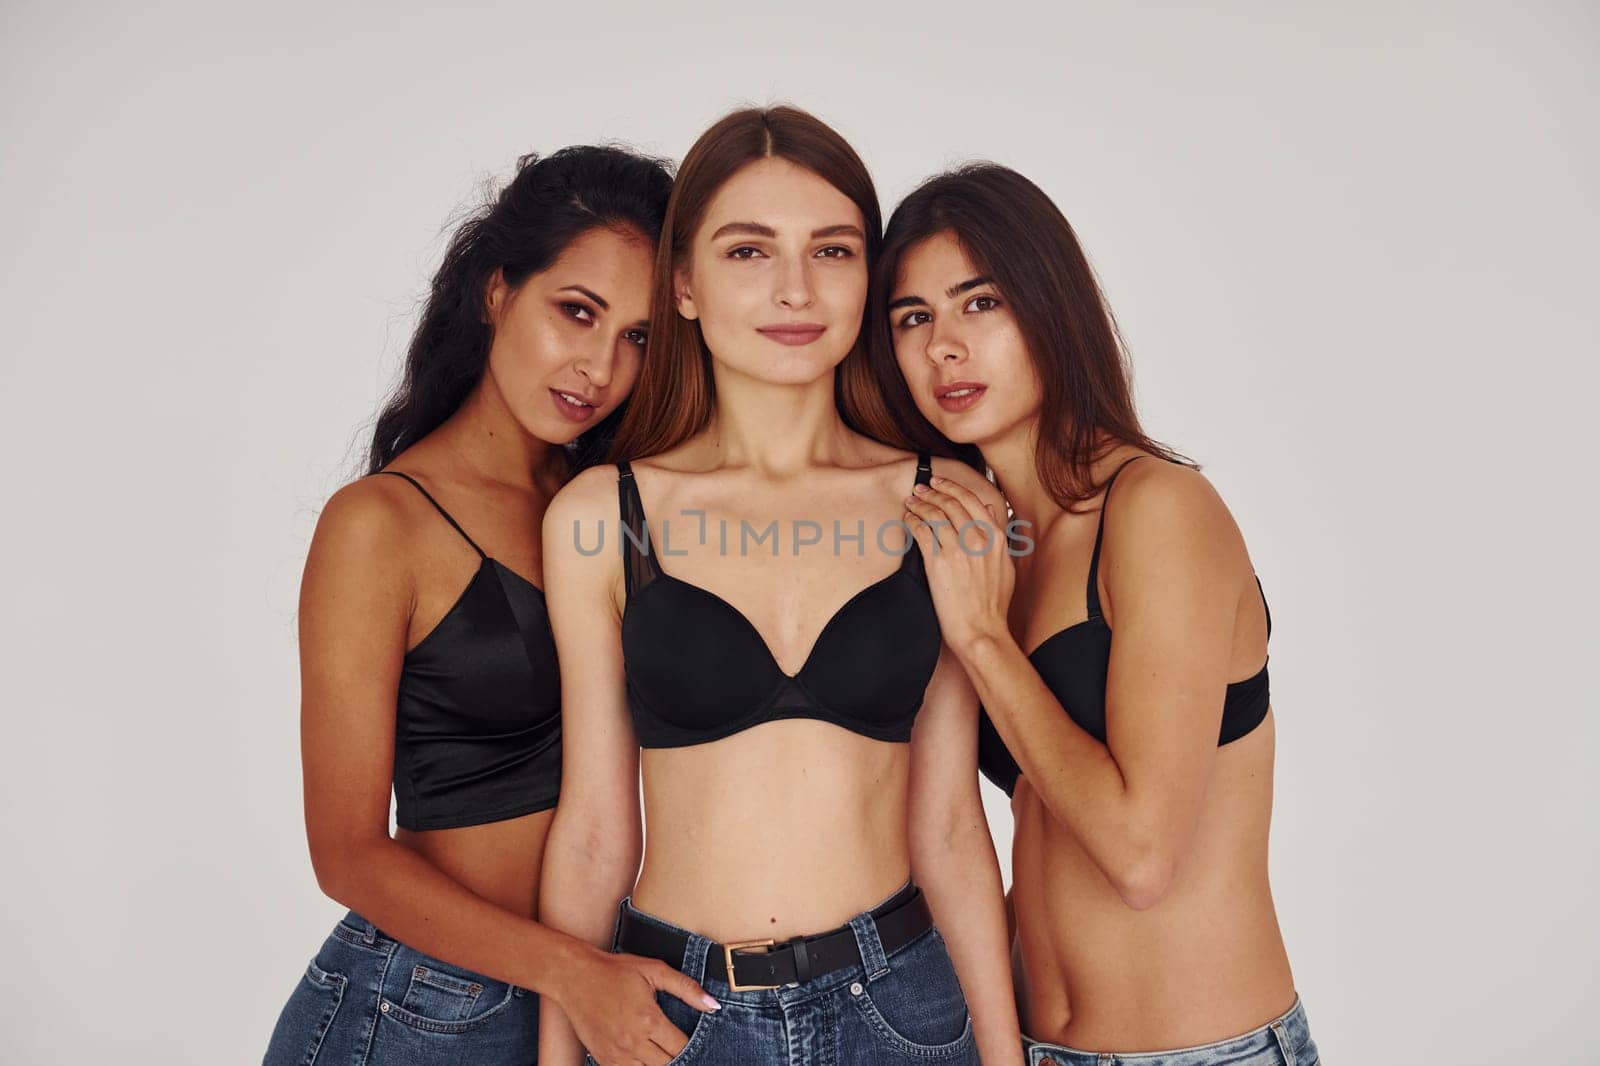 Embracing each other. Three young women in lingerie together indoors. White background by Standret